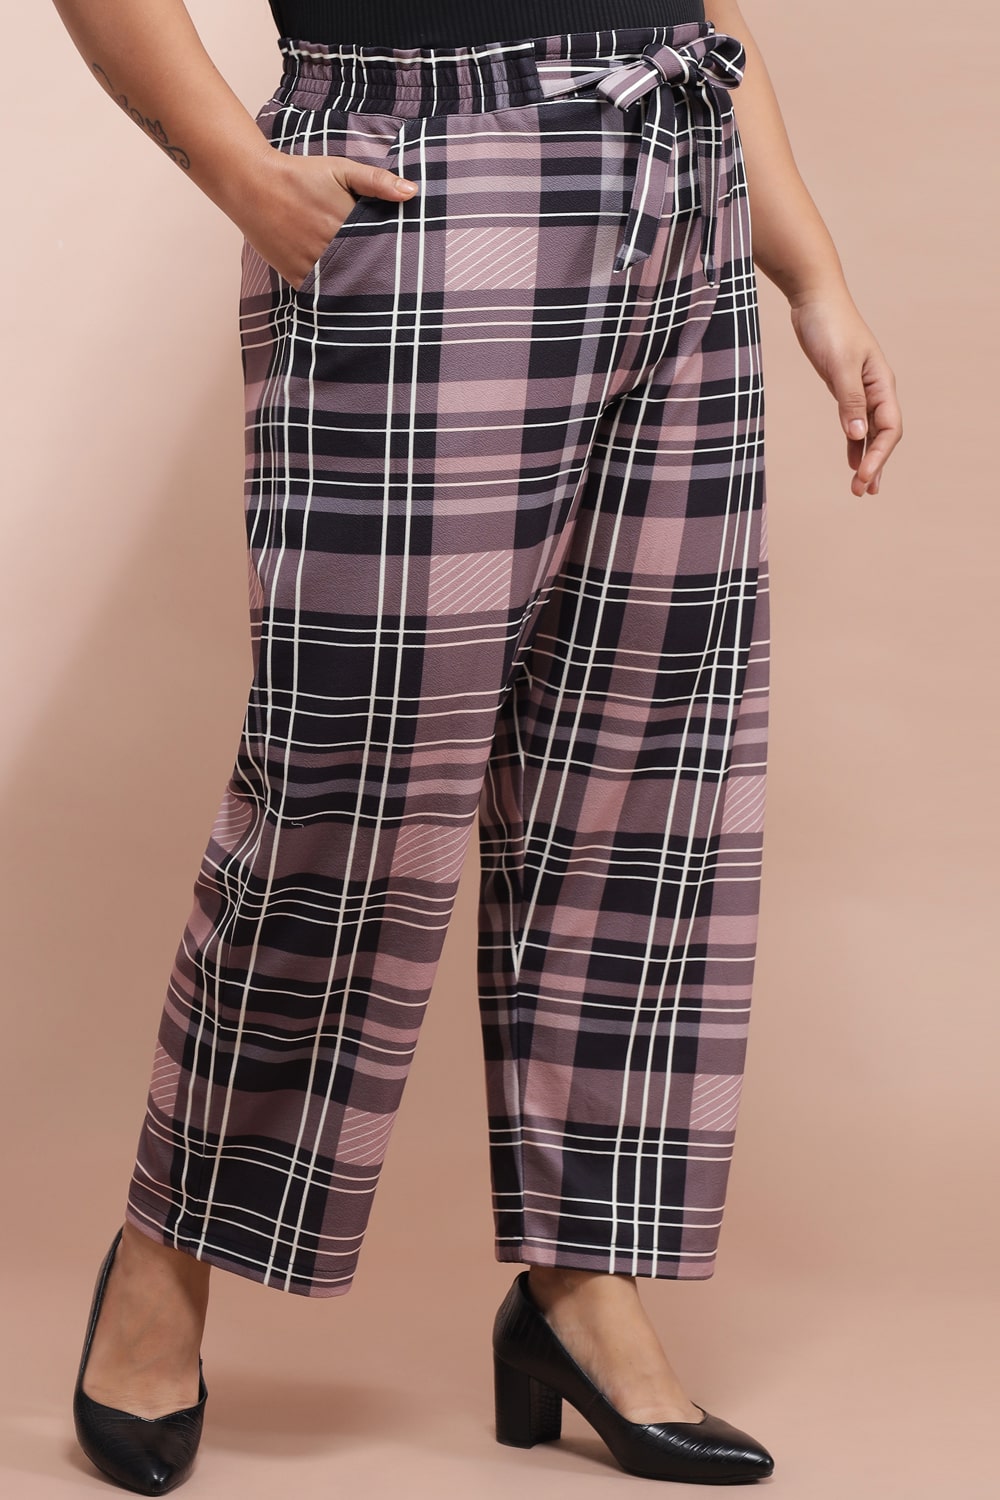 Dusty Pink Black Checkered Pants for Women